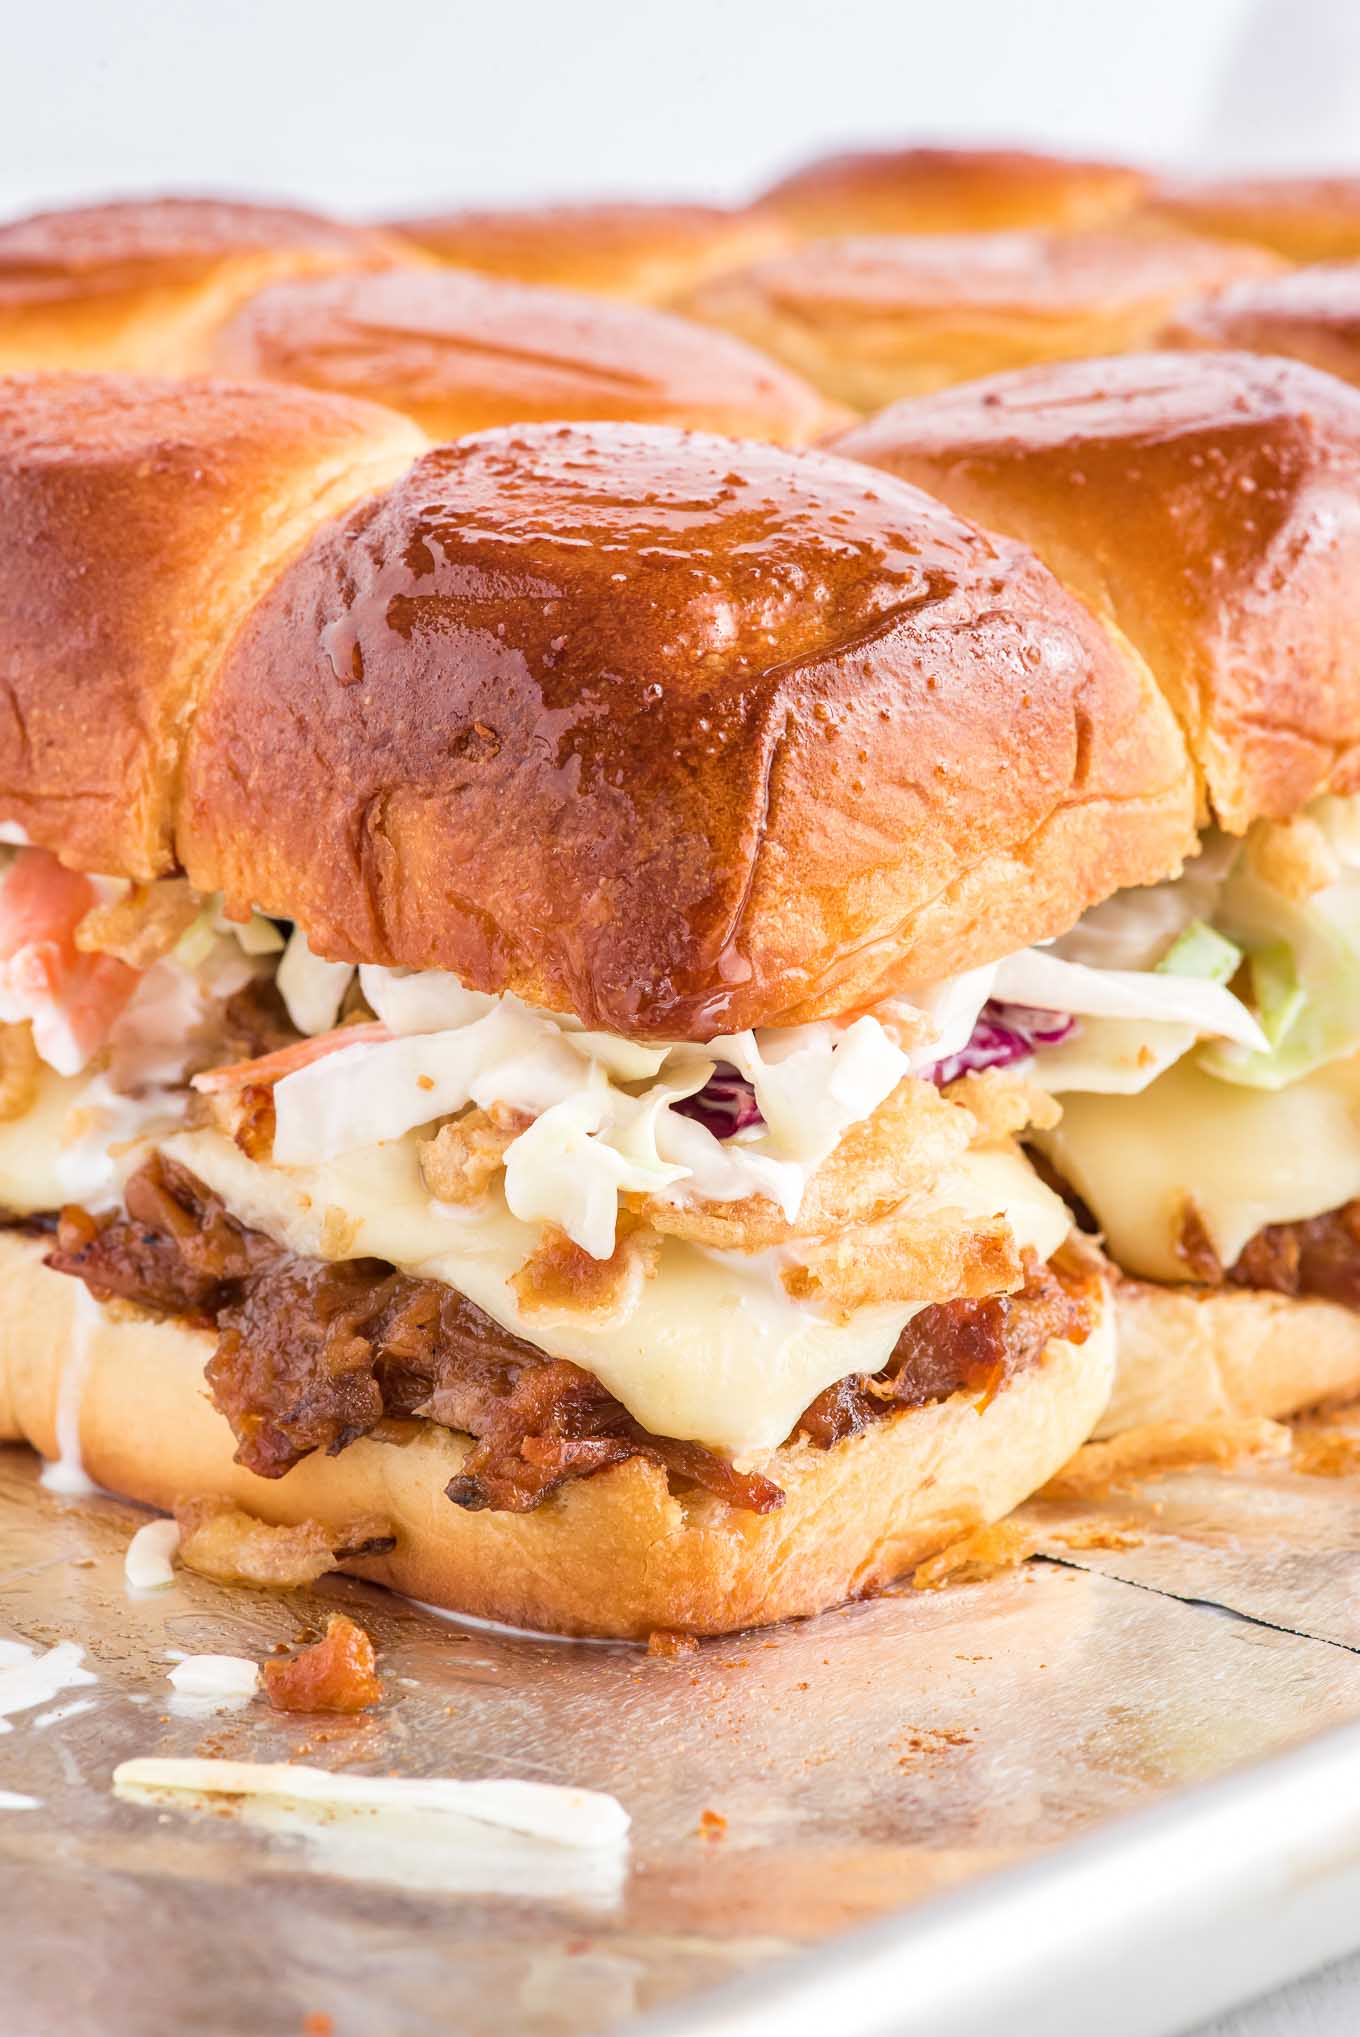 Pulled pork sliders on a baking tray with layers of pork, cheese, onions, and slaw.